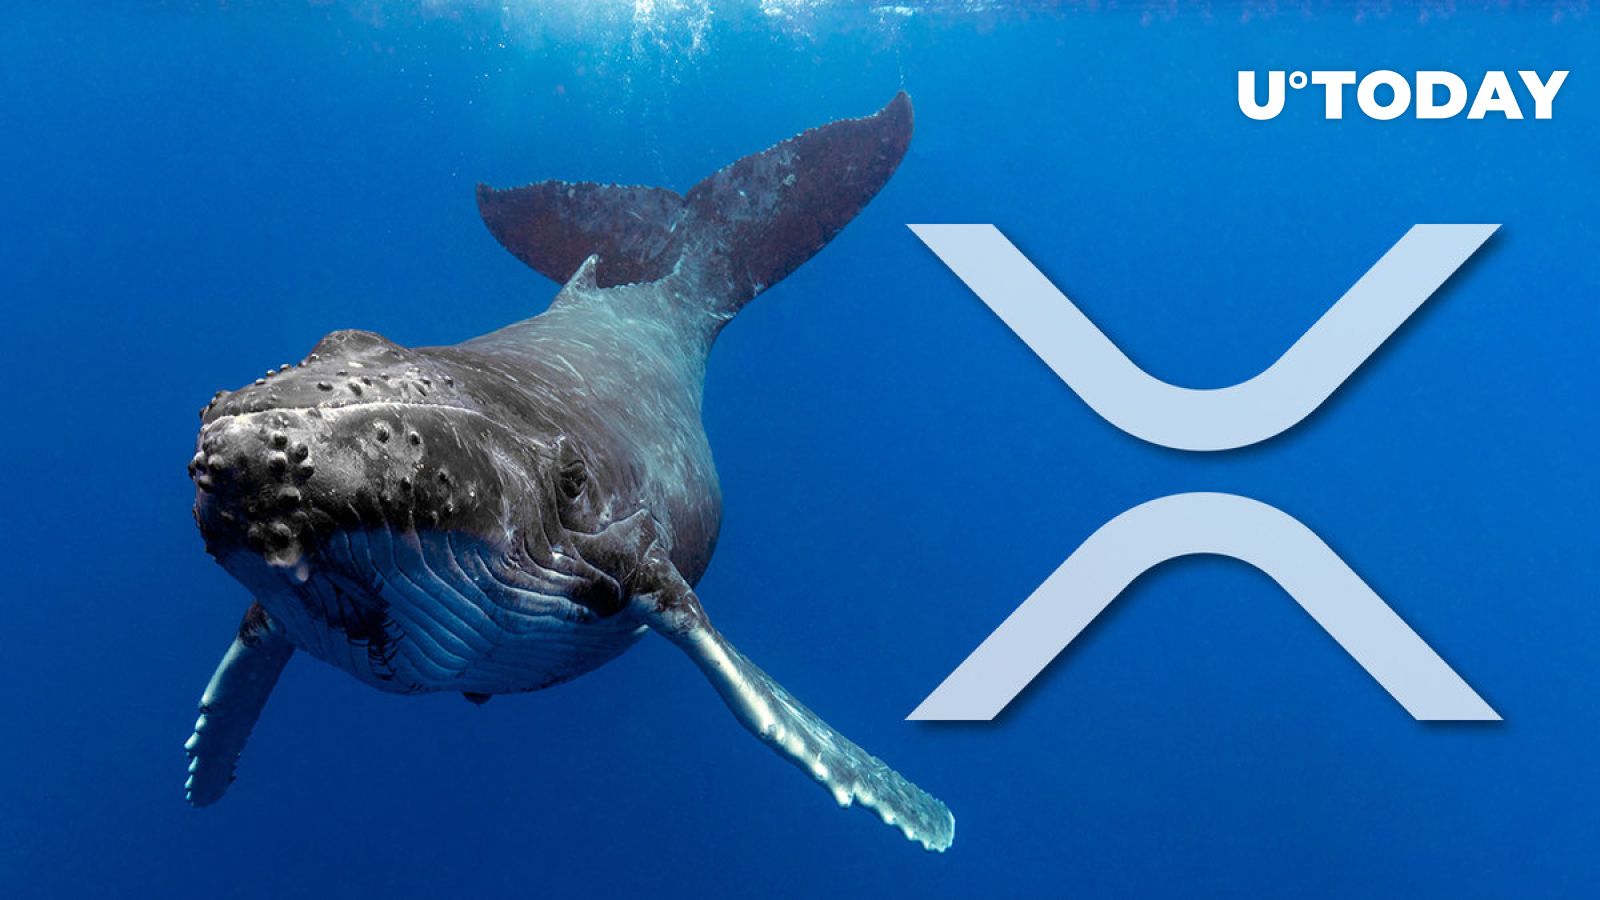 massive-xrp-whales-shift-313-million-xrp-in-one-fell-swoop-details